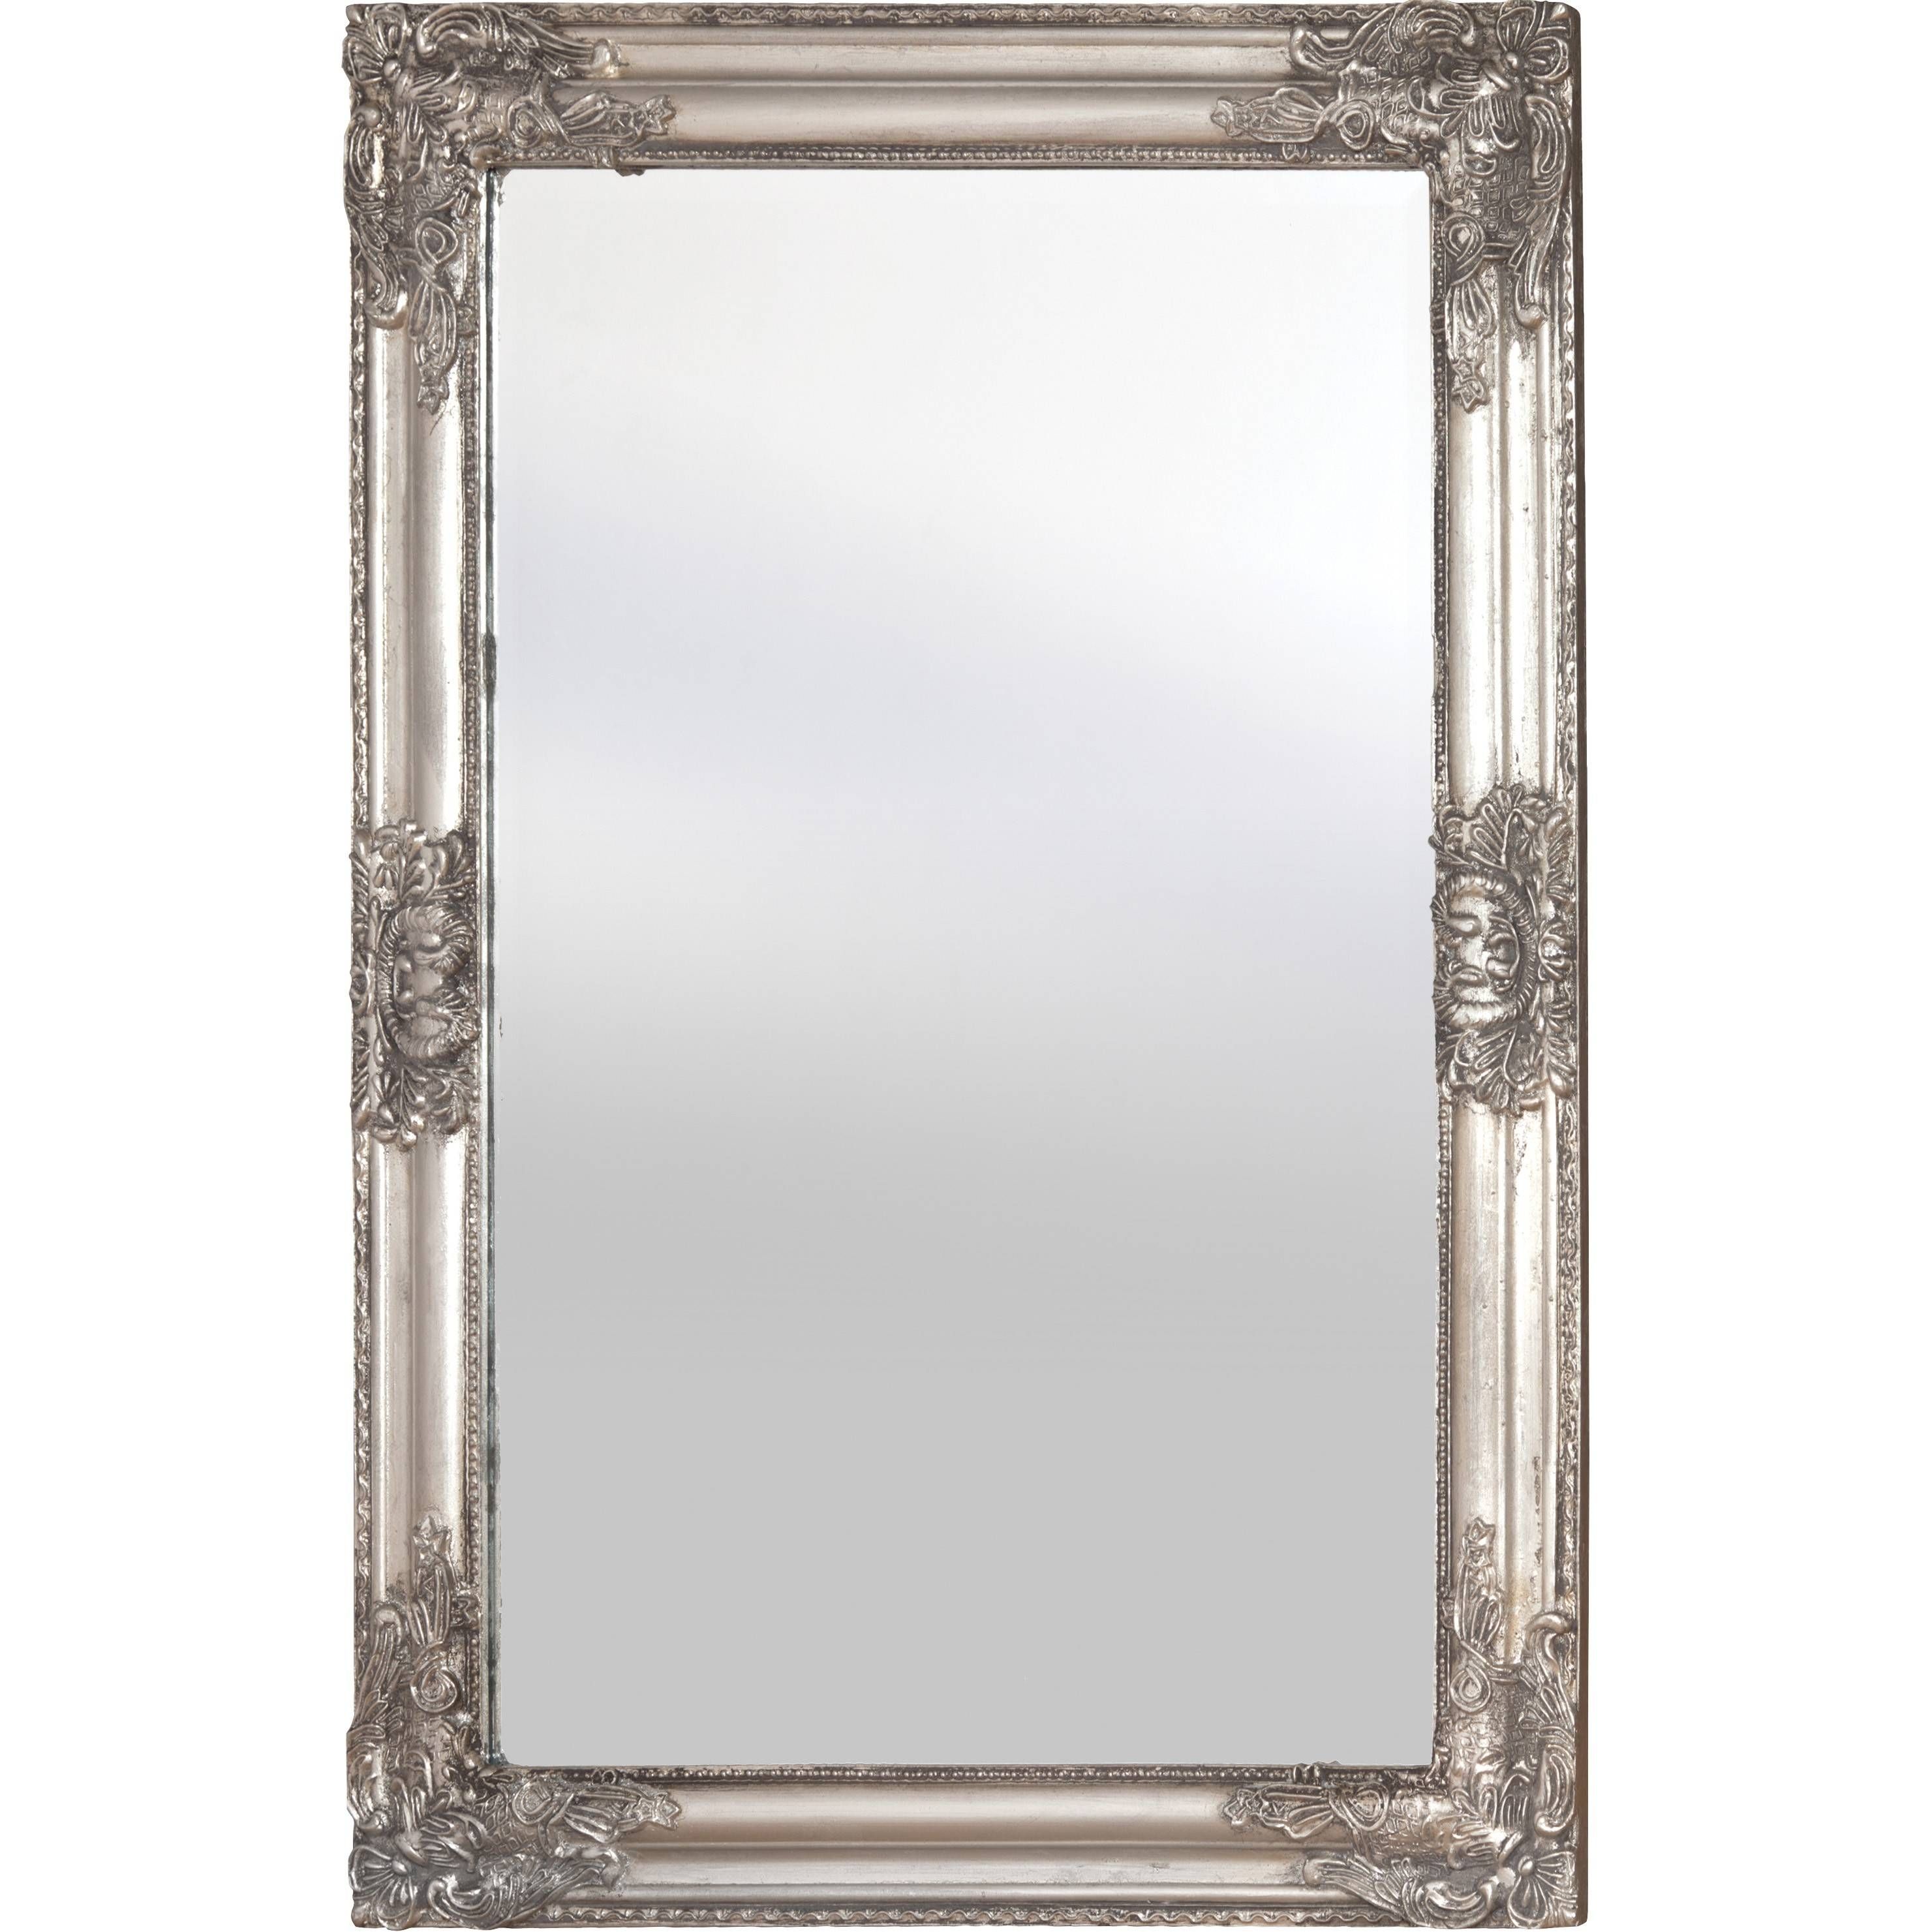 Mirrors | Home & Decor | Jysk Canada Within Long Antique Mirrors (View 12 of 15)